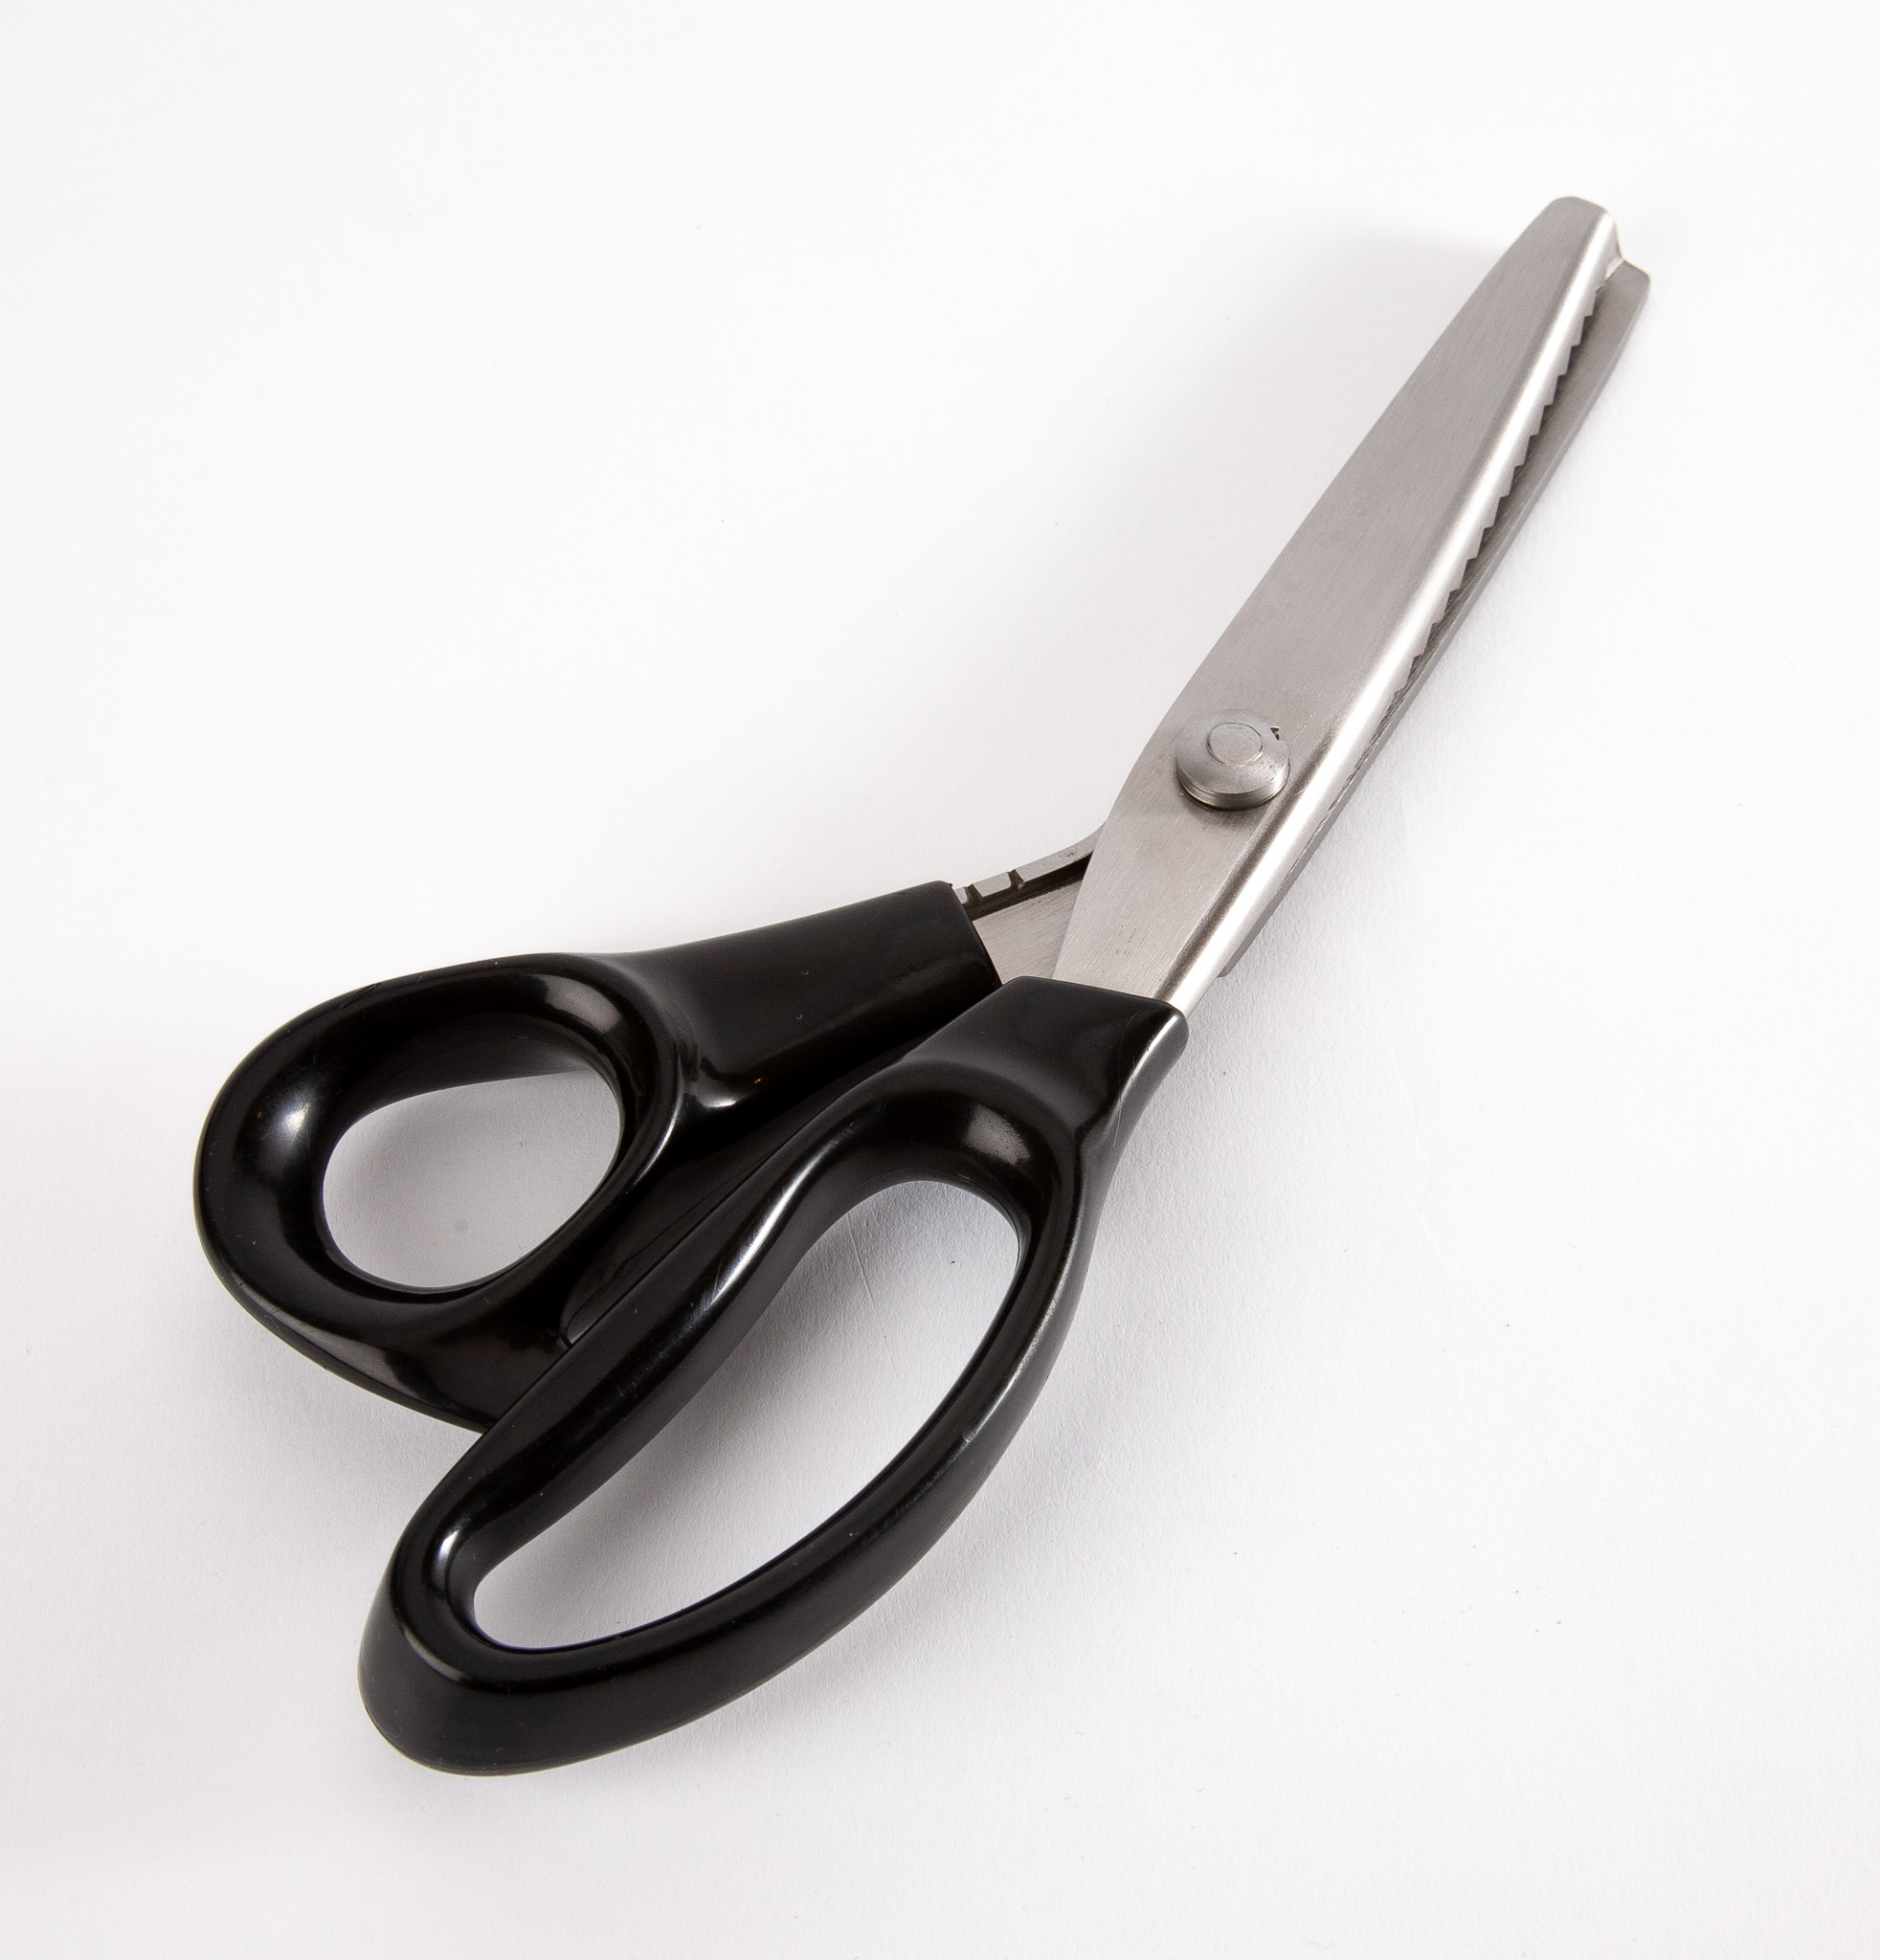 Pinking Shears Sewing Fabric Leather Scissors – sparklingselections